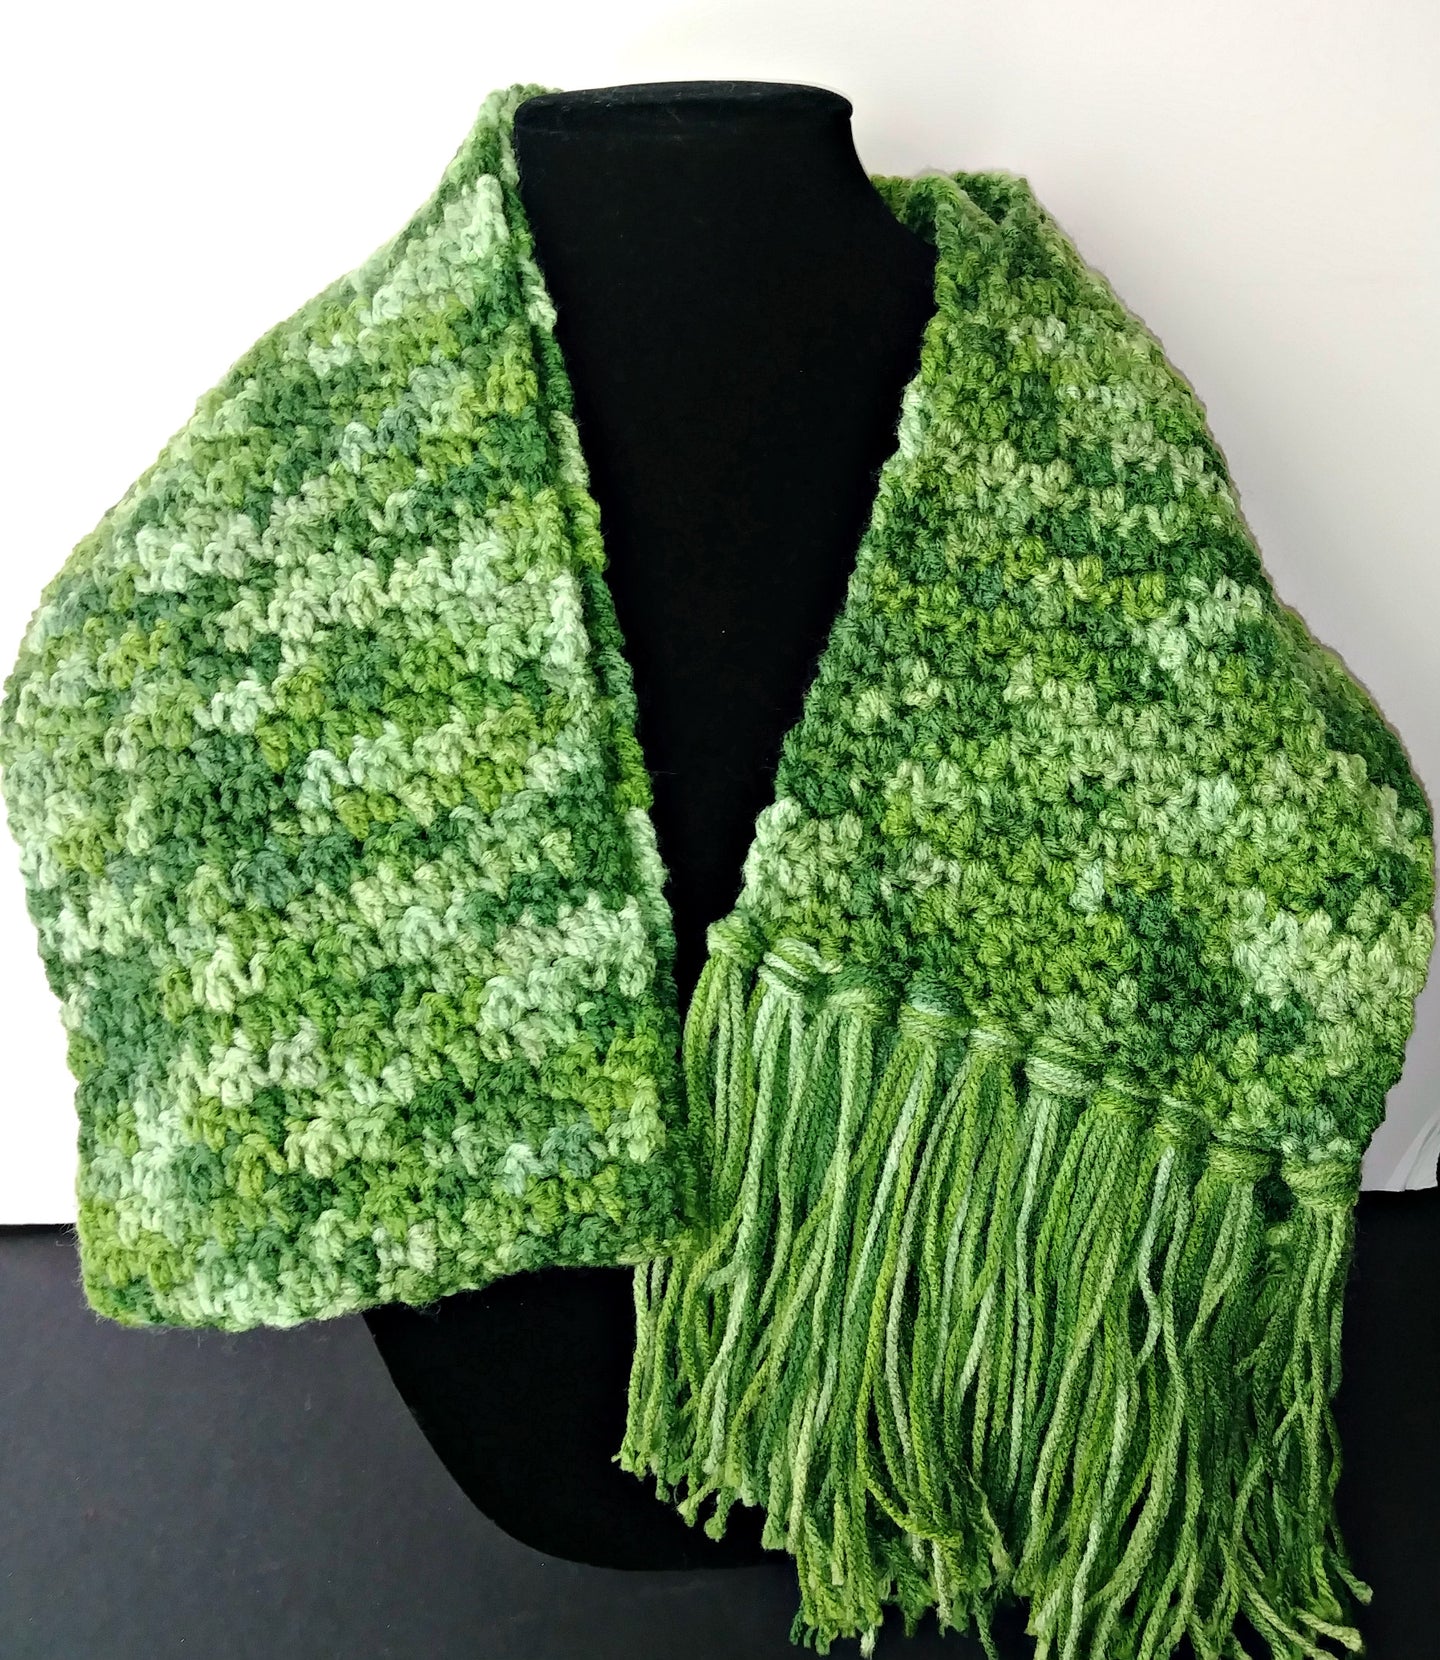 Green Variegated Winter Unisex Scarf with Fringe